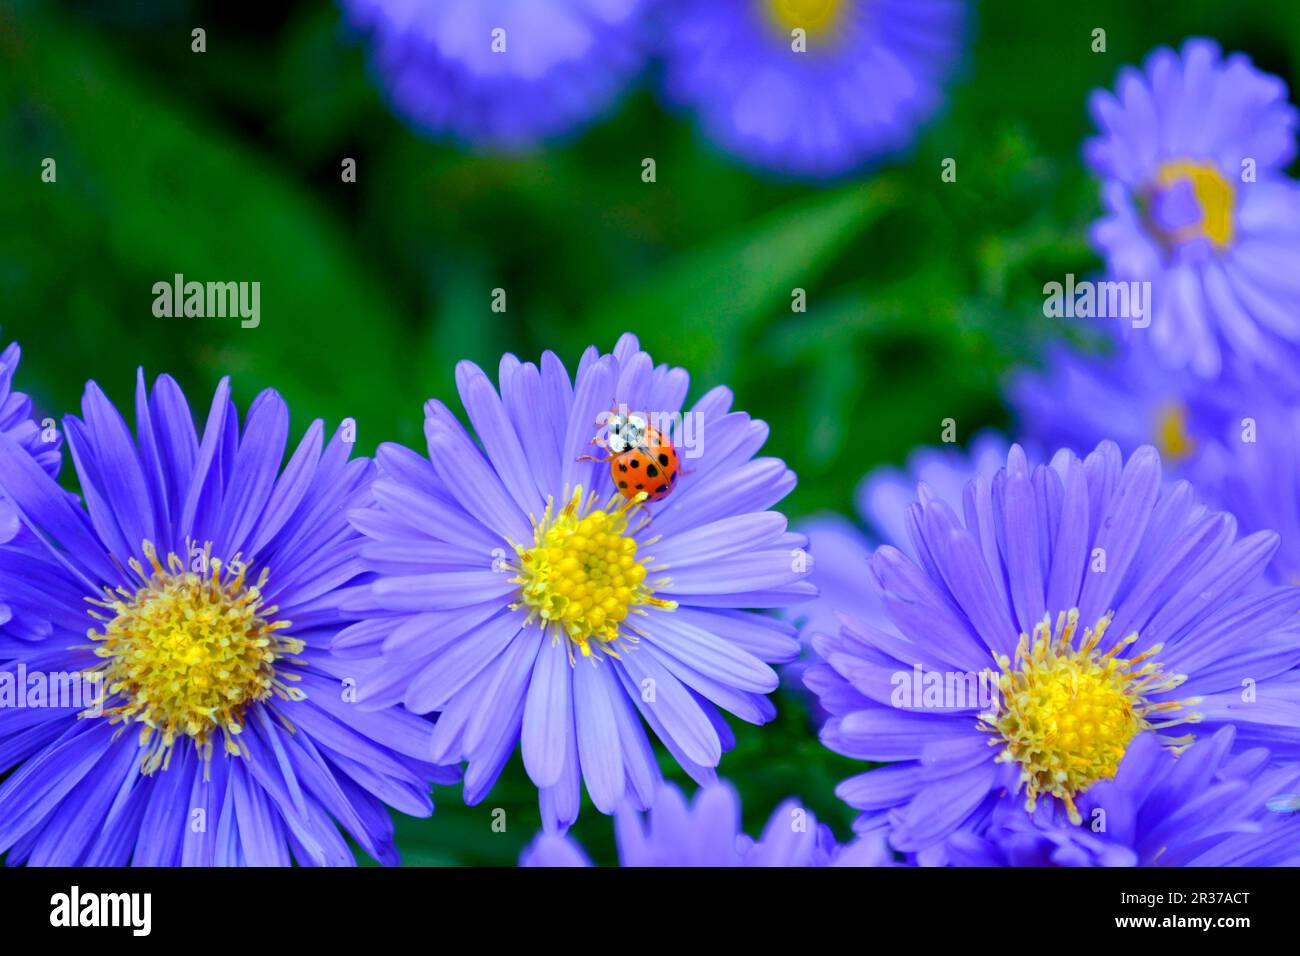 Blue Autumn Aster with Ladybird in the Garden, New Belgium Aster (Aster novi-belgii), New Belgium Autumn Aster, Smooth-leaved Aster asian lady beetle Stock Photo